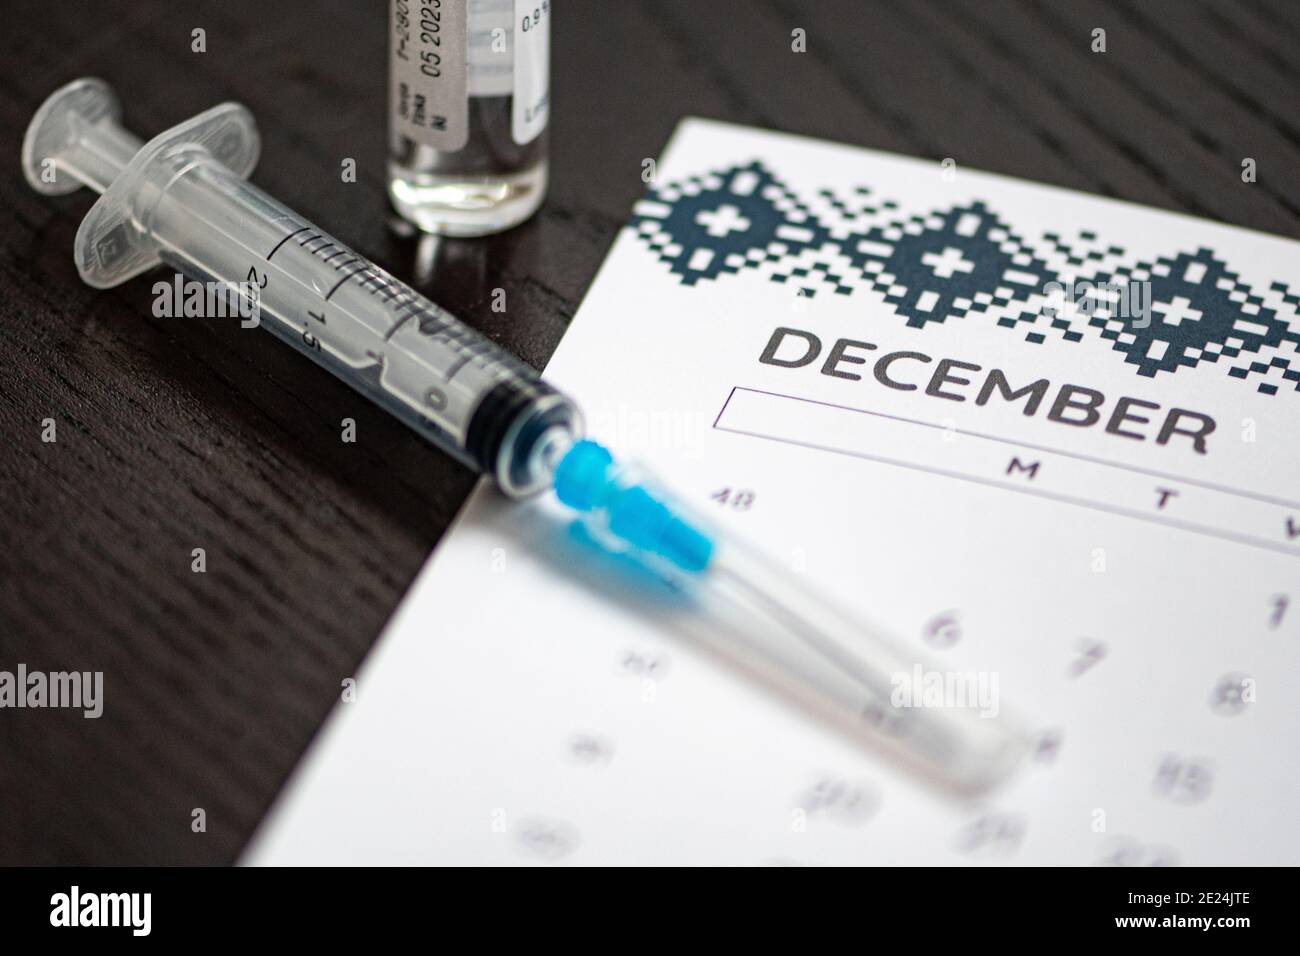 Syringe, vial and calendar with month of December on a black table ready to be used. Covid or Coronavirus vaccine background Stock Photo